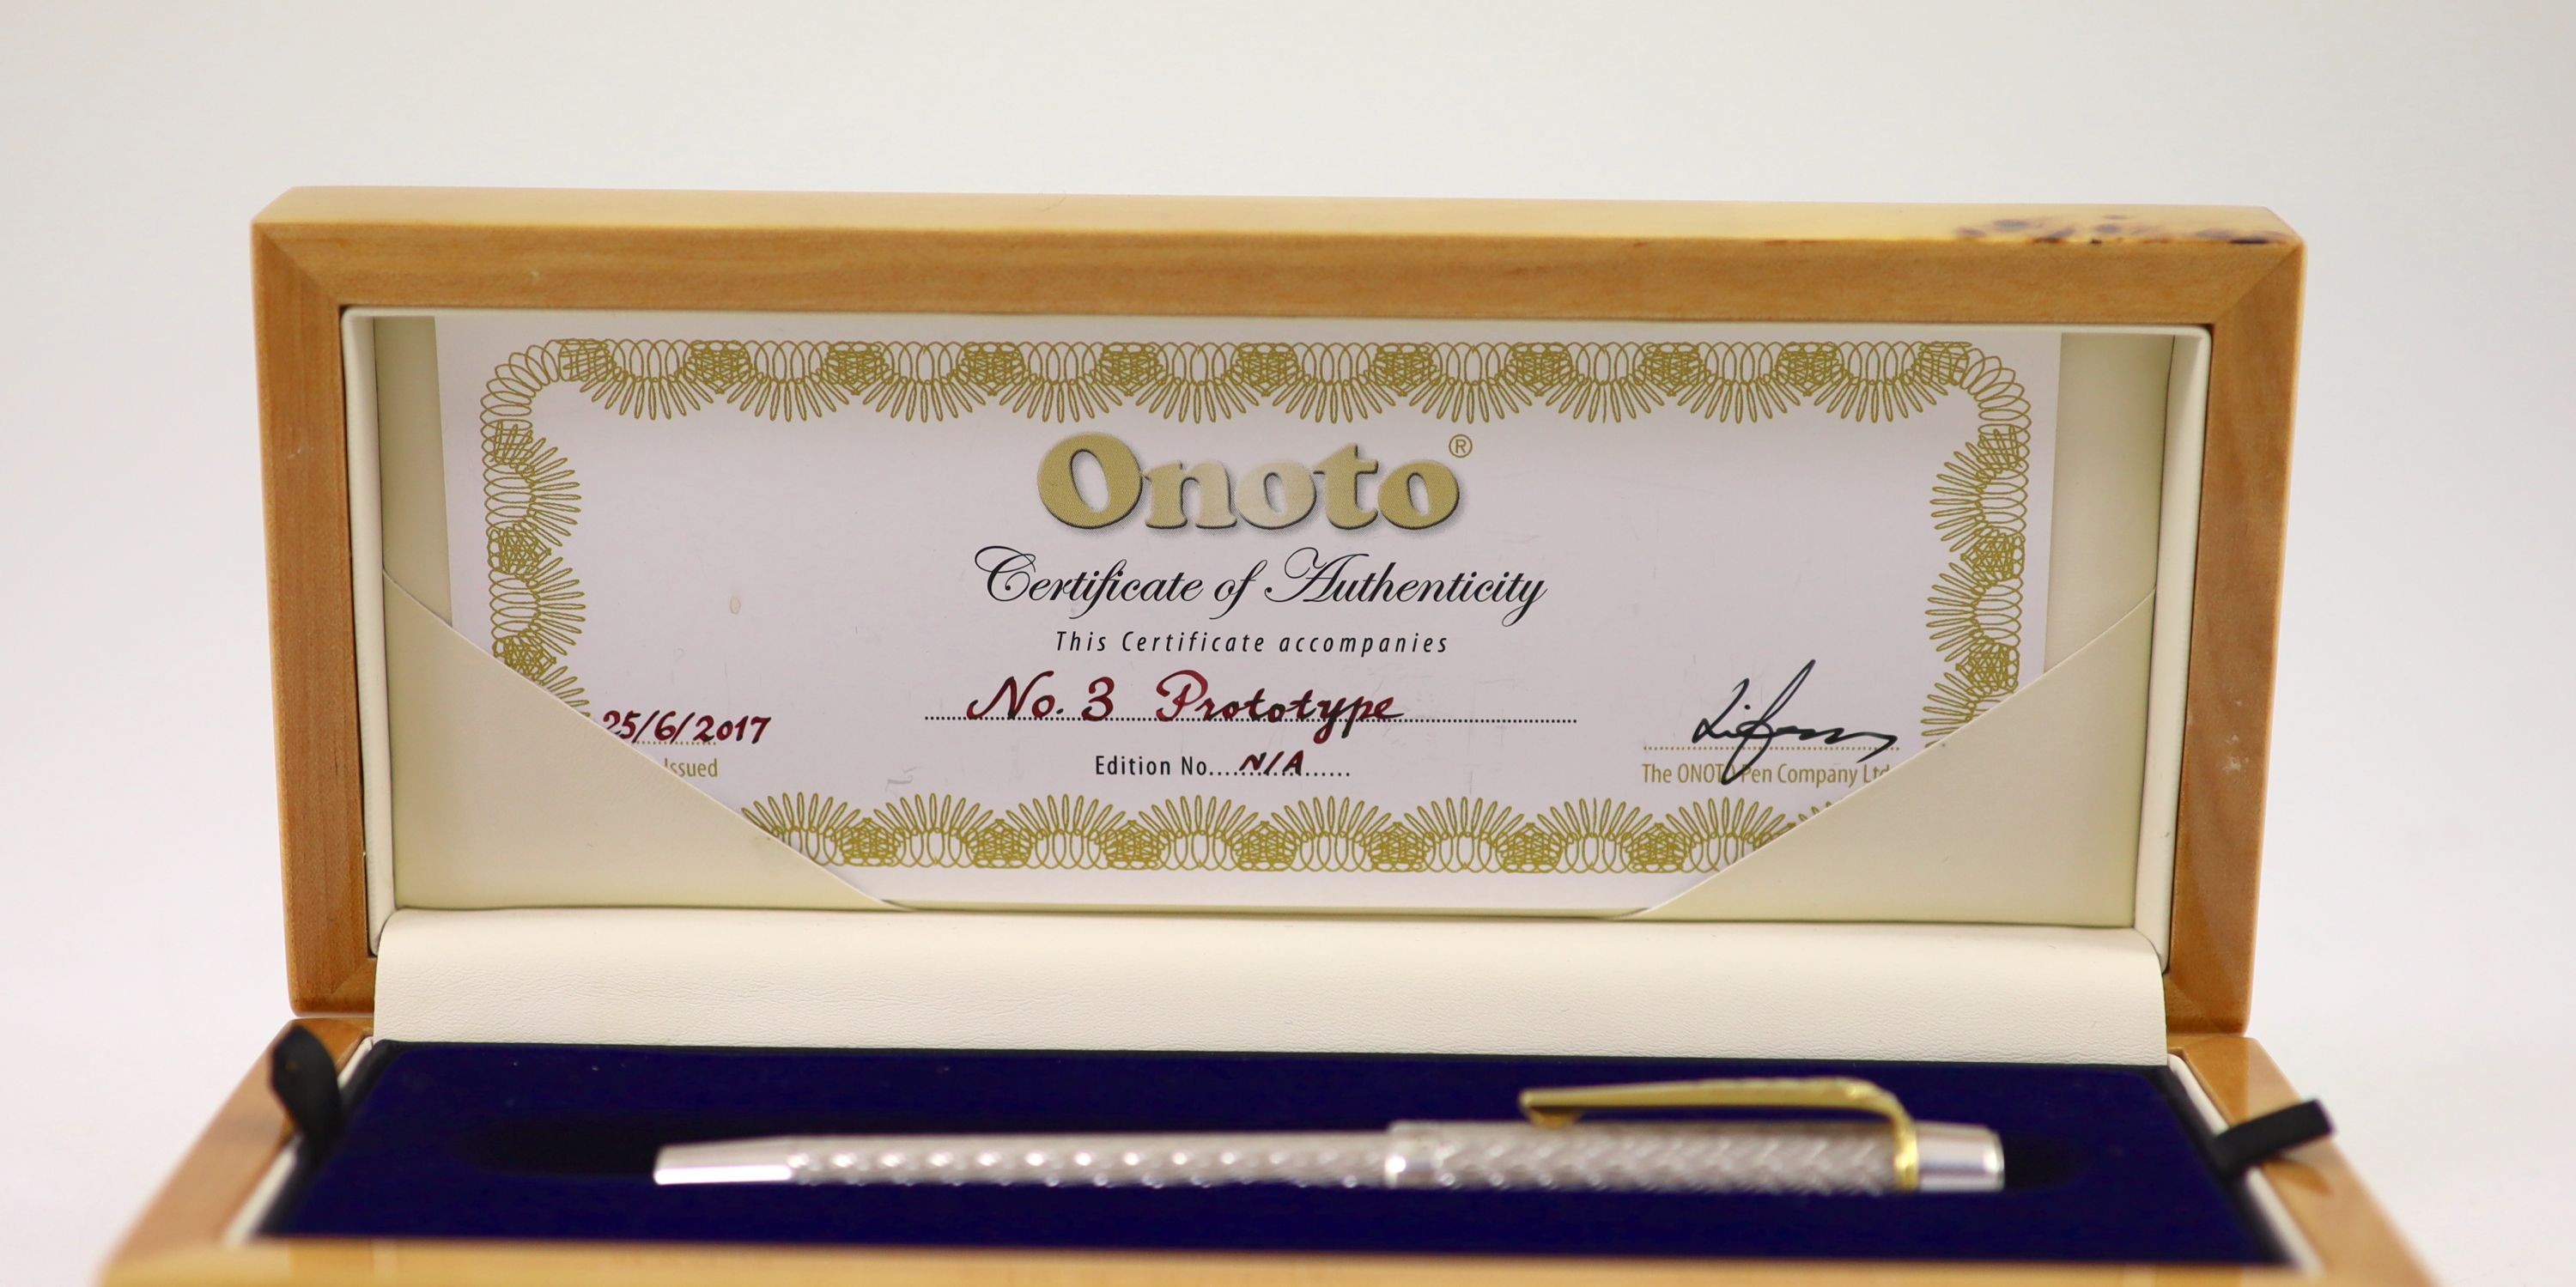 Onoto No.3 Prototype fountain pen, boxed with Onoto certificate, white metal casing - Image 5 of 6